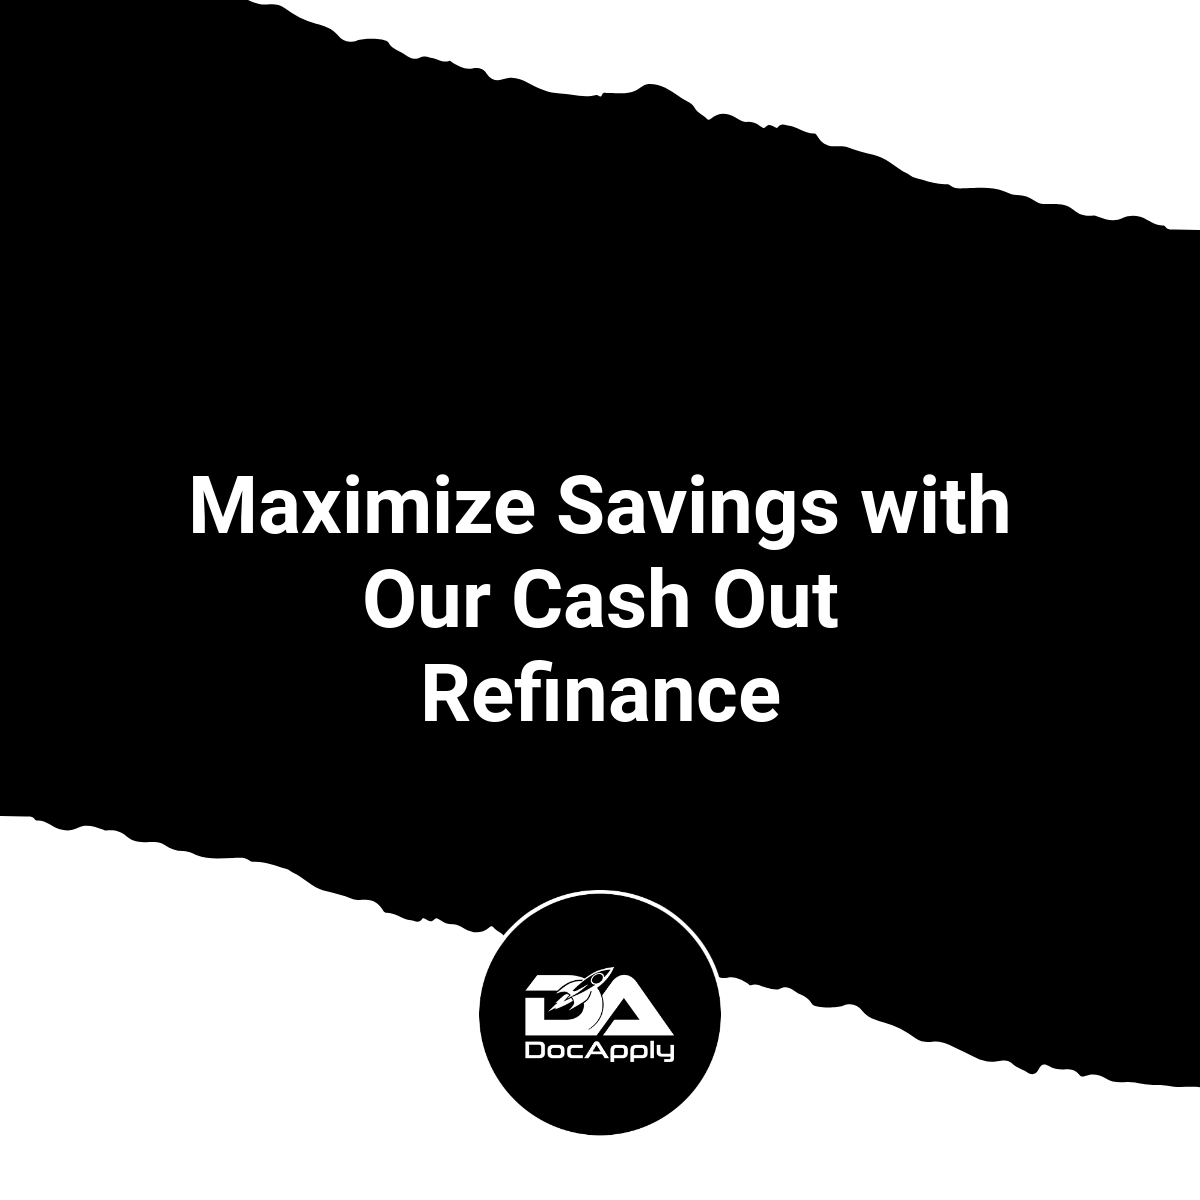 Got a loan estimate? 🤔 Bring it to DocApply Mortgage Brokerage and witness the magic we can work with your savings! 🌟 With our cash-out refinance options, you're set for a brighter financial future. 💰✨ #MortgageMadeEasy #CashOutRefinance #UnlockSavings